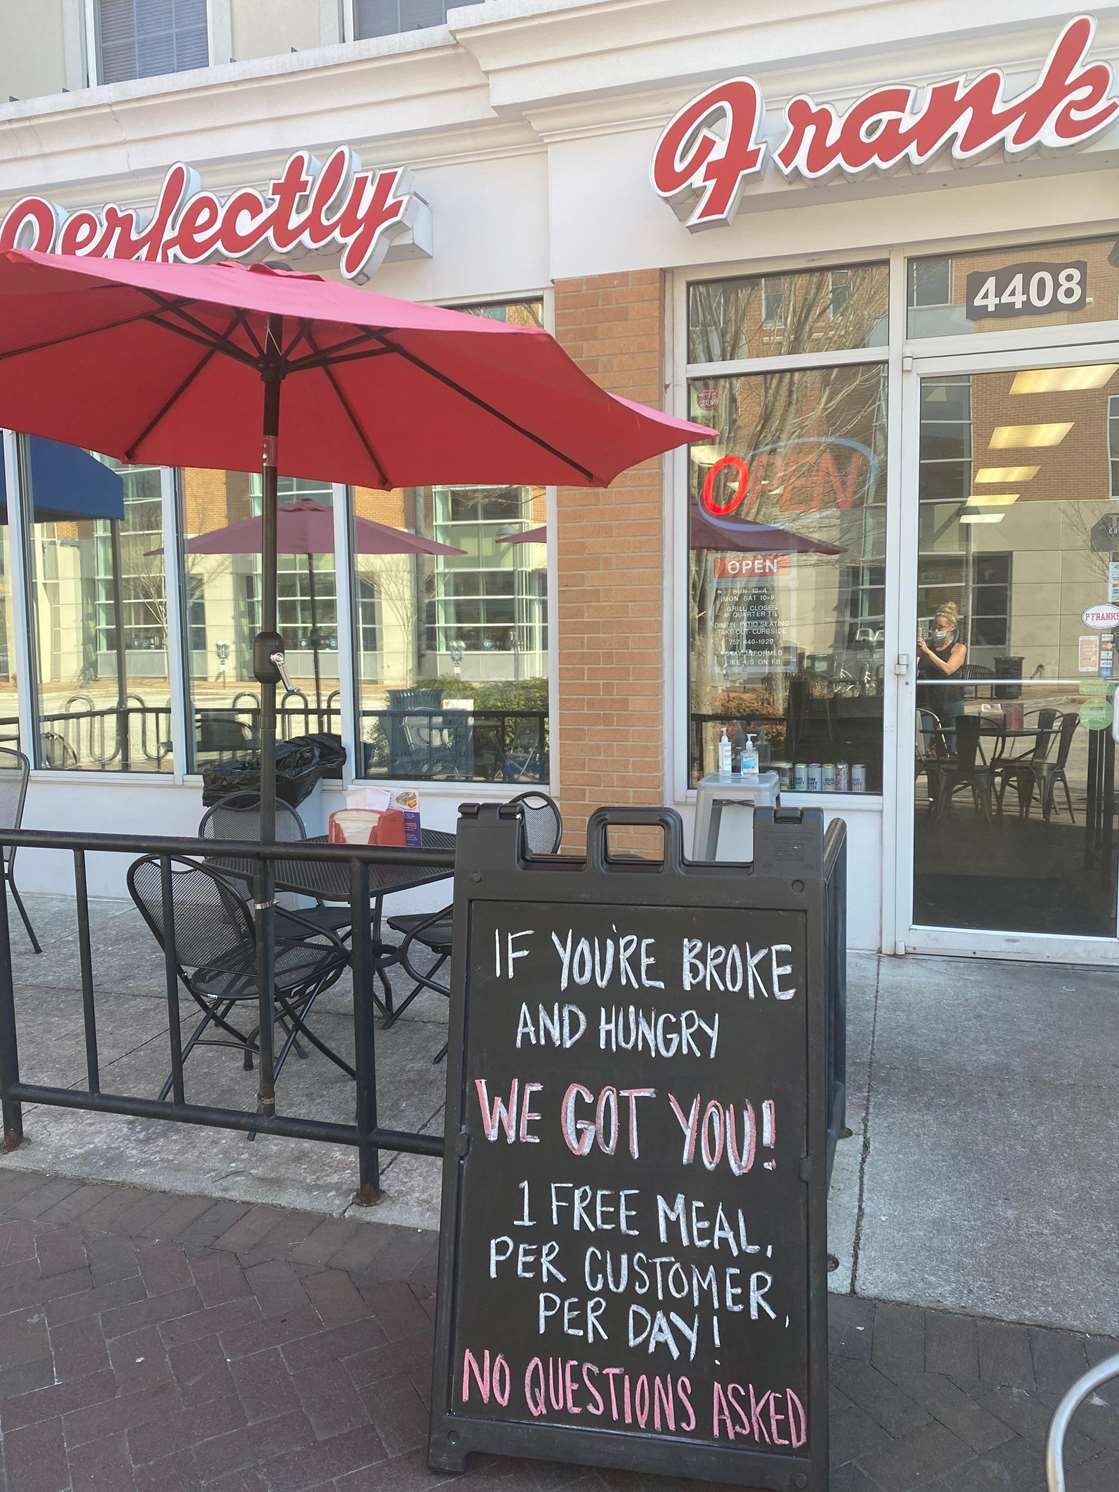 Broke and hungry?' This Virginia restaurant is offering one free meal a day, no questions asked